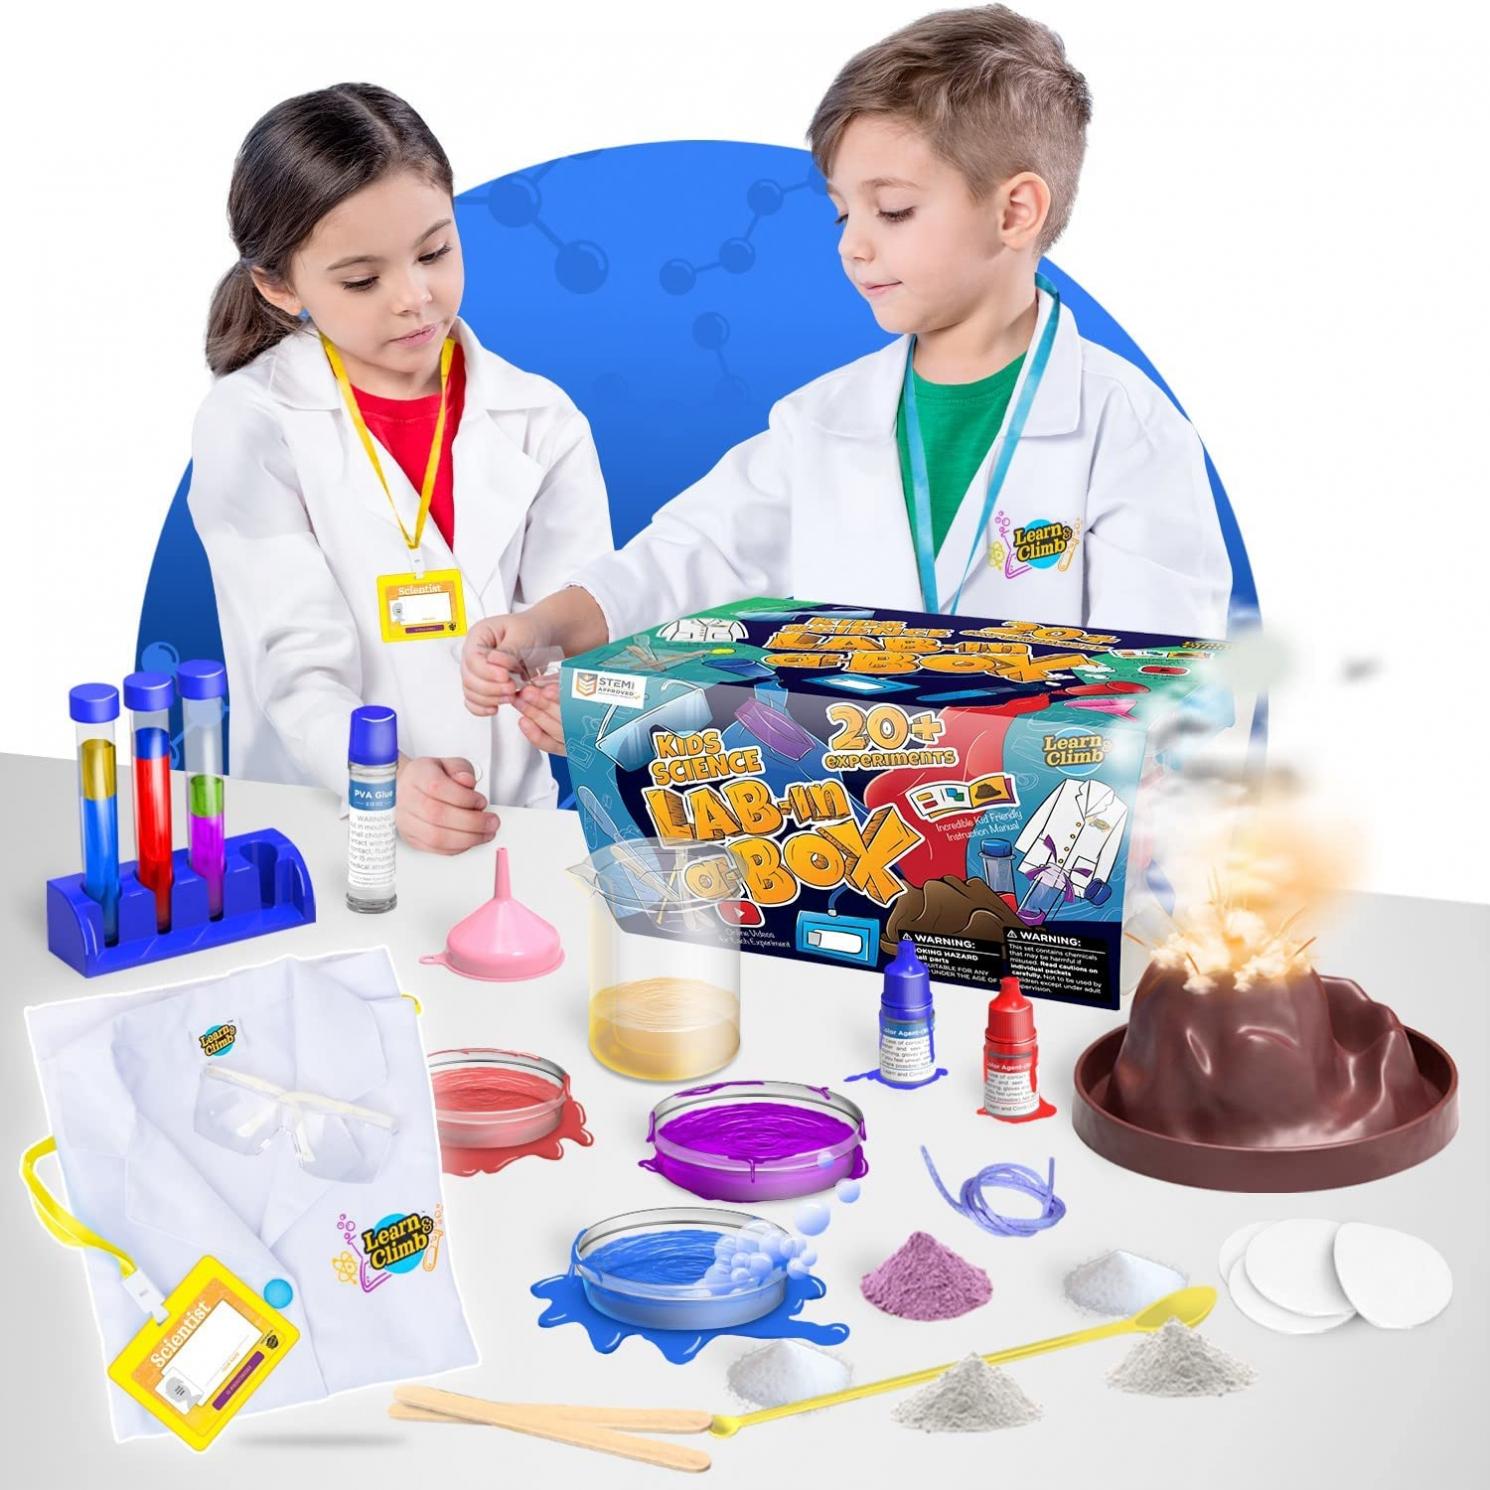 Kids Science Kit with Lab Coat Gift Set - Over 20 Experiments for Kids 4-6